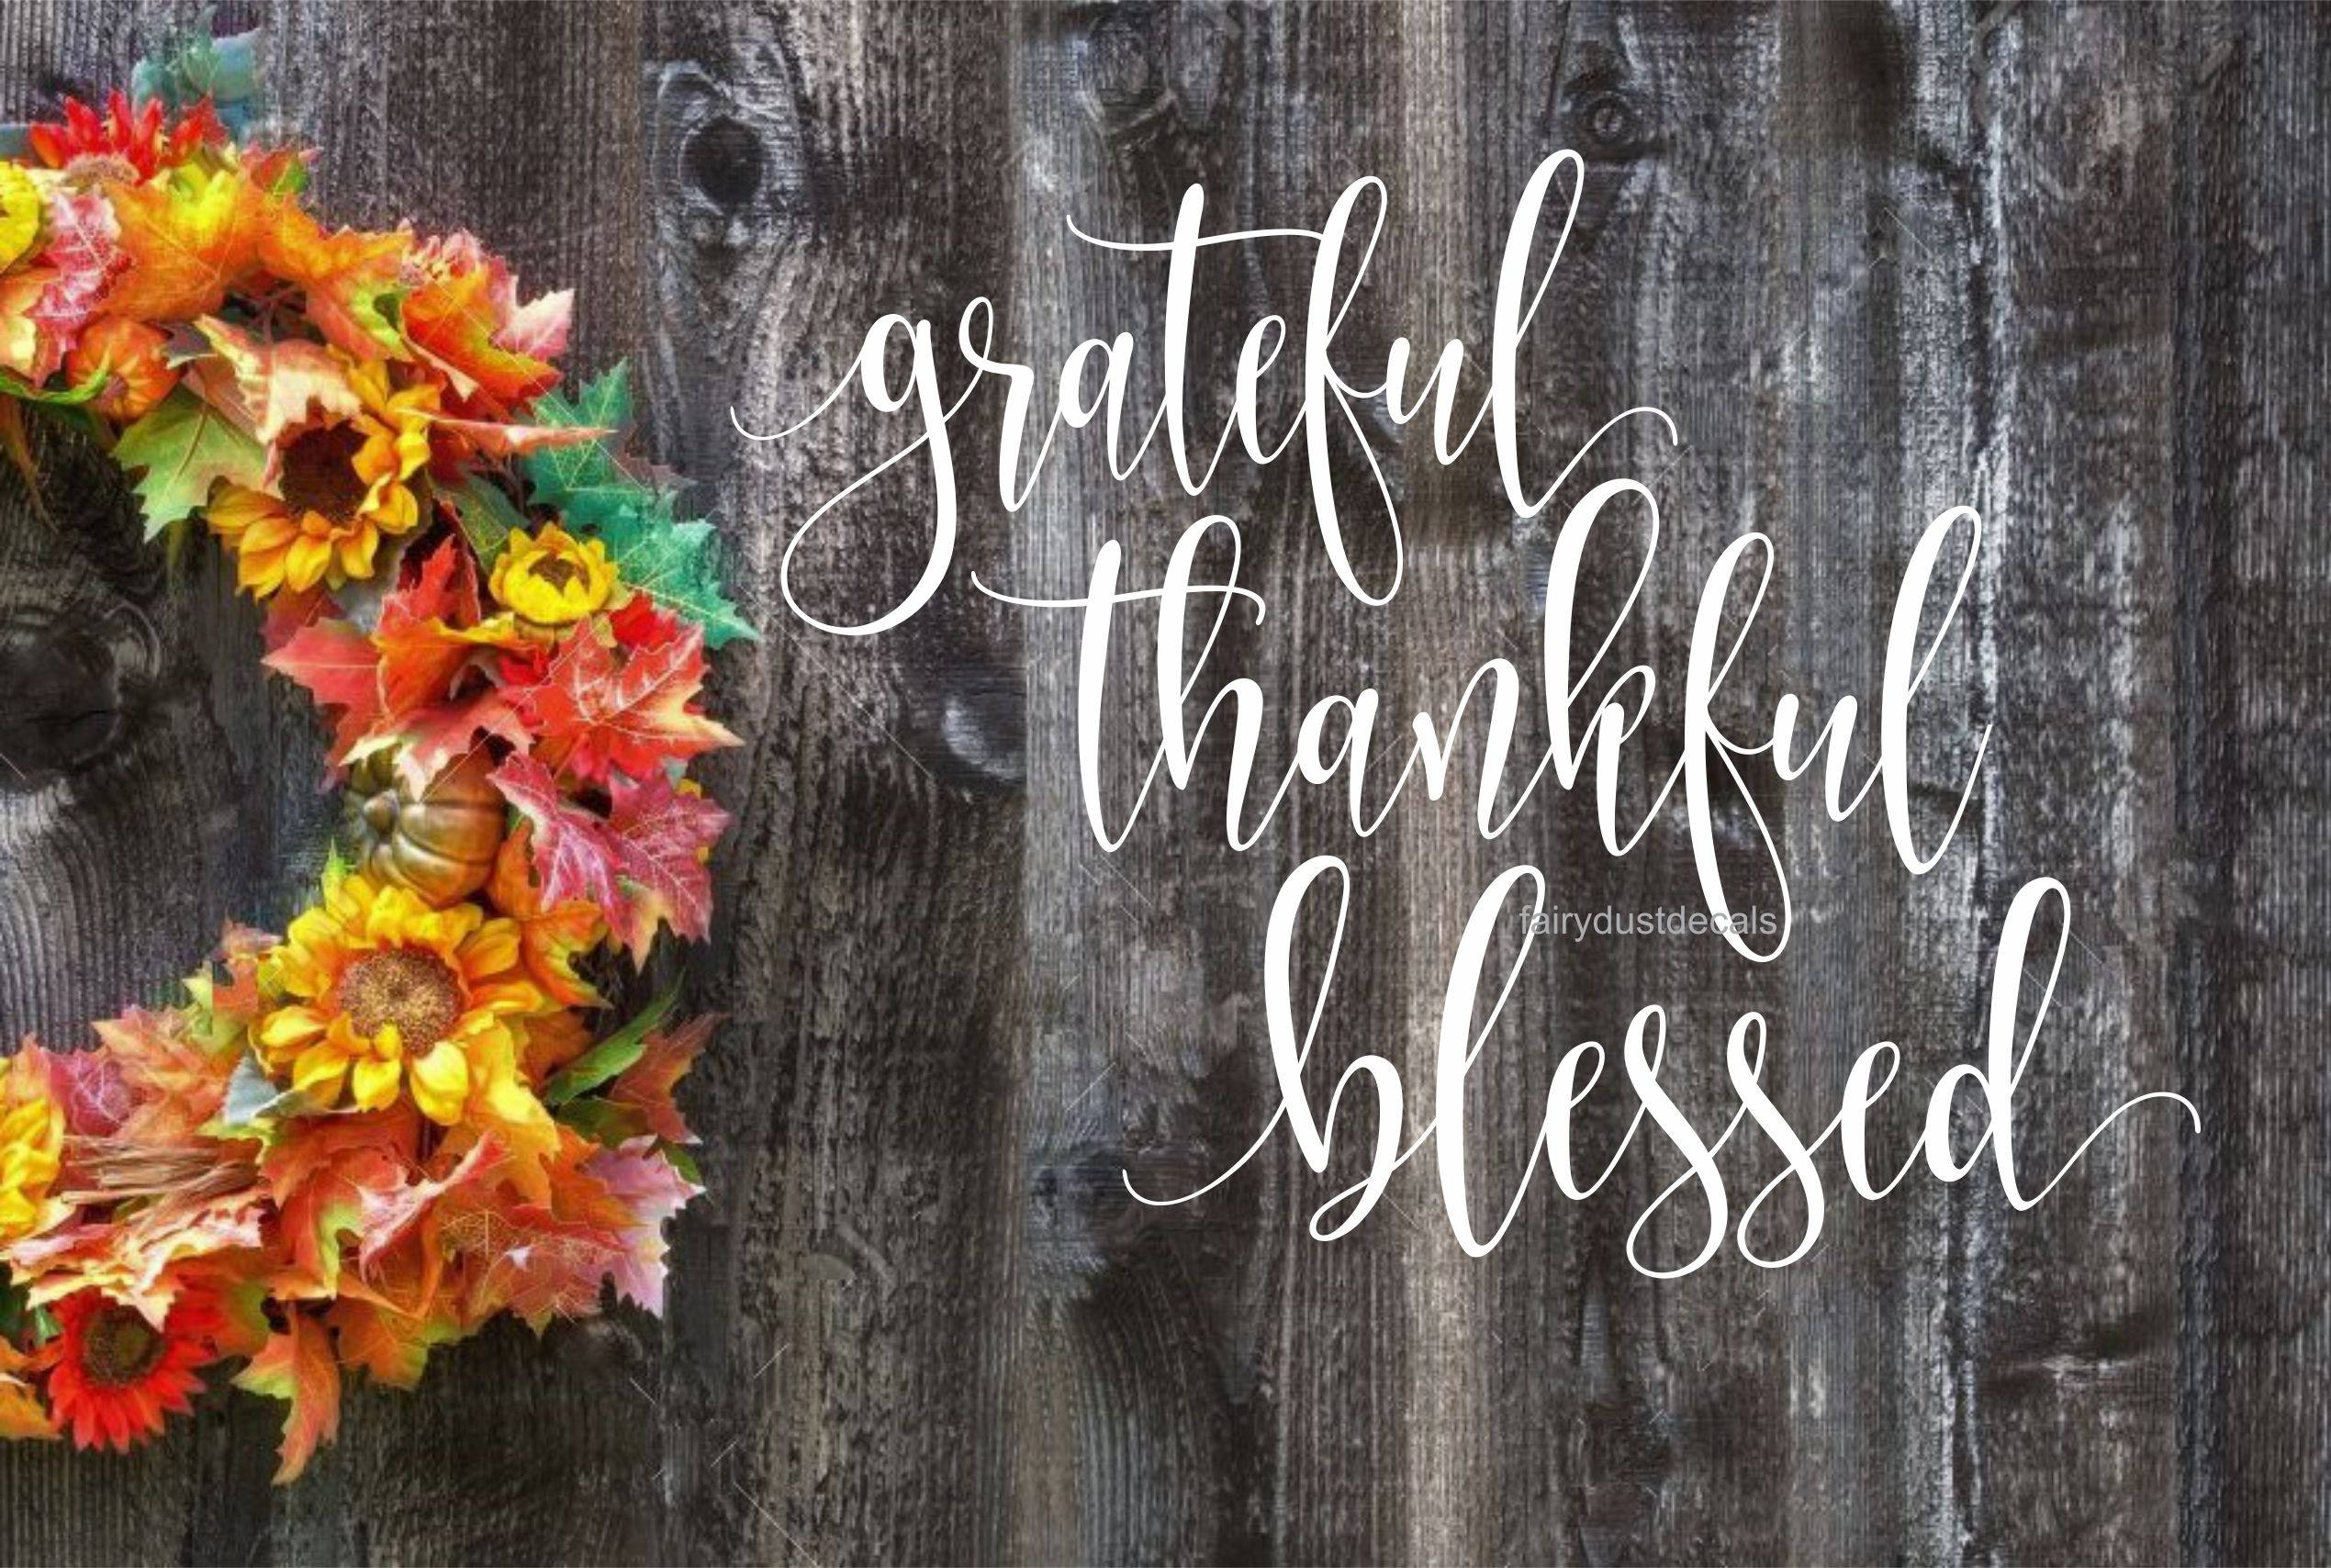 Download Grateful Thankful Blessed decal vinyl lettering